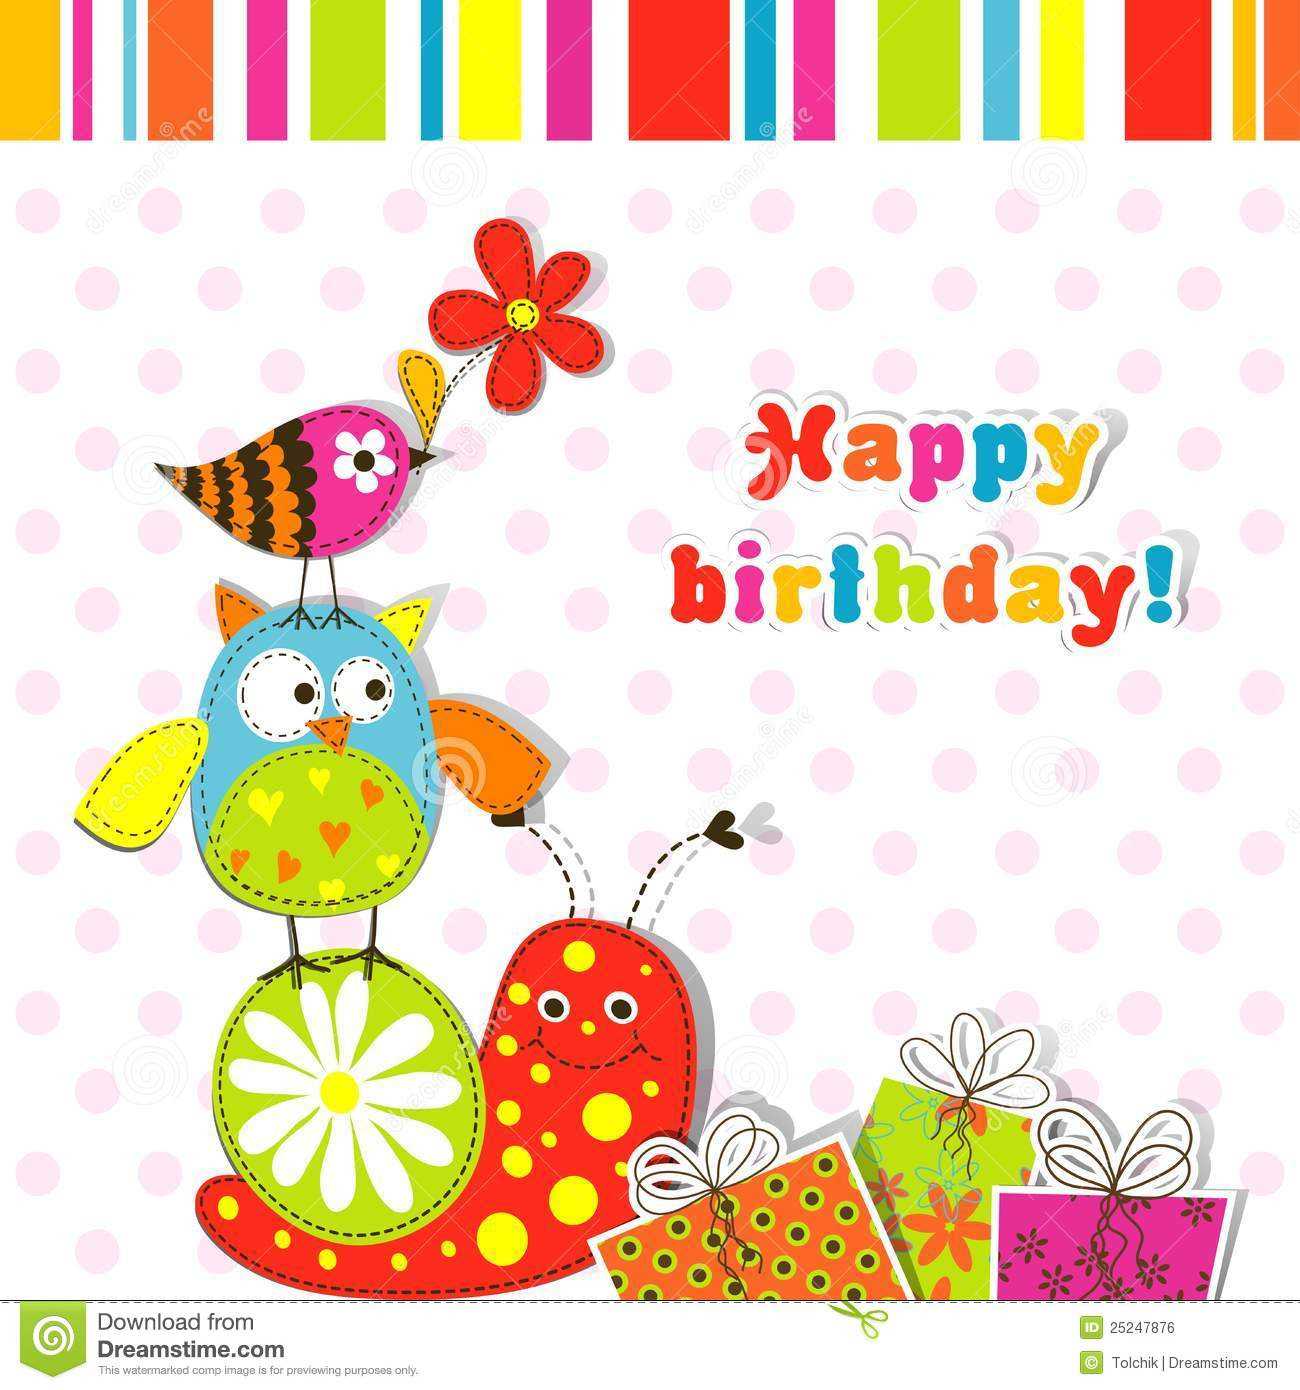 Birthday Template Free Download Awesome Birthday Card With Birthday Card Publisher Template